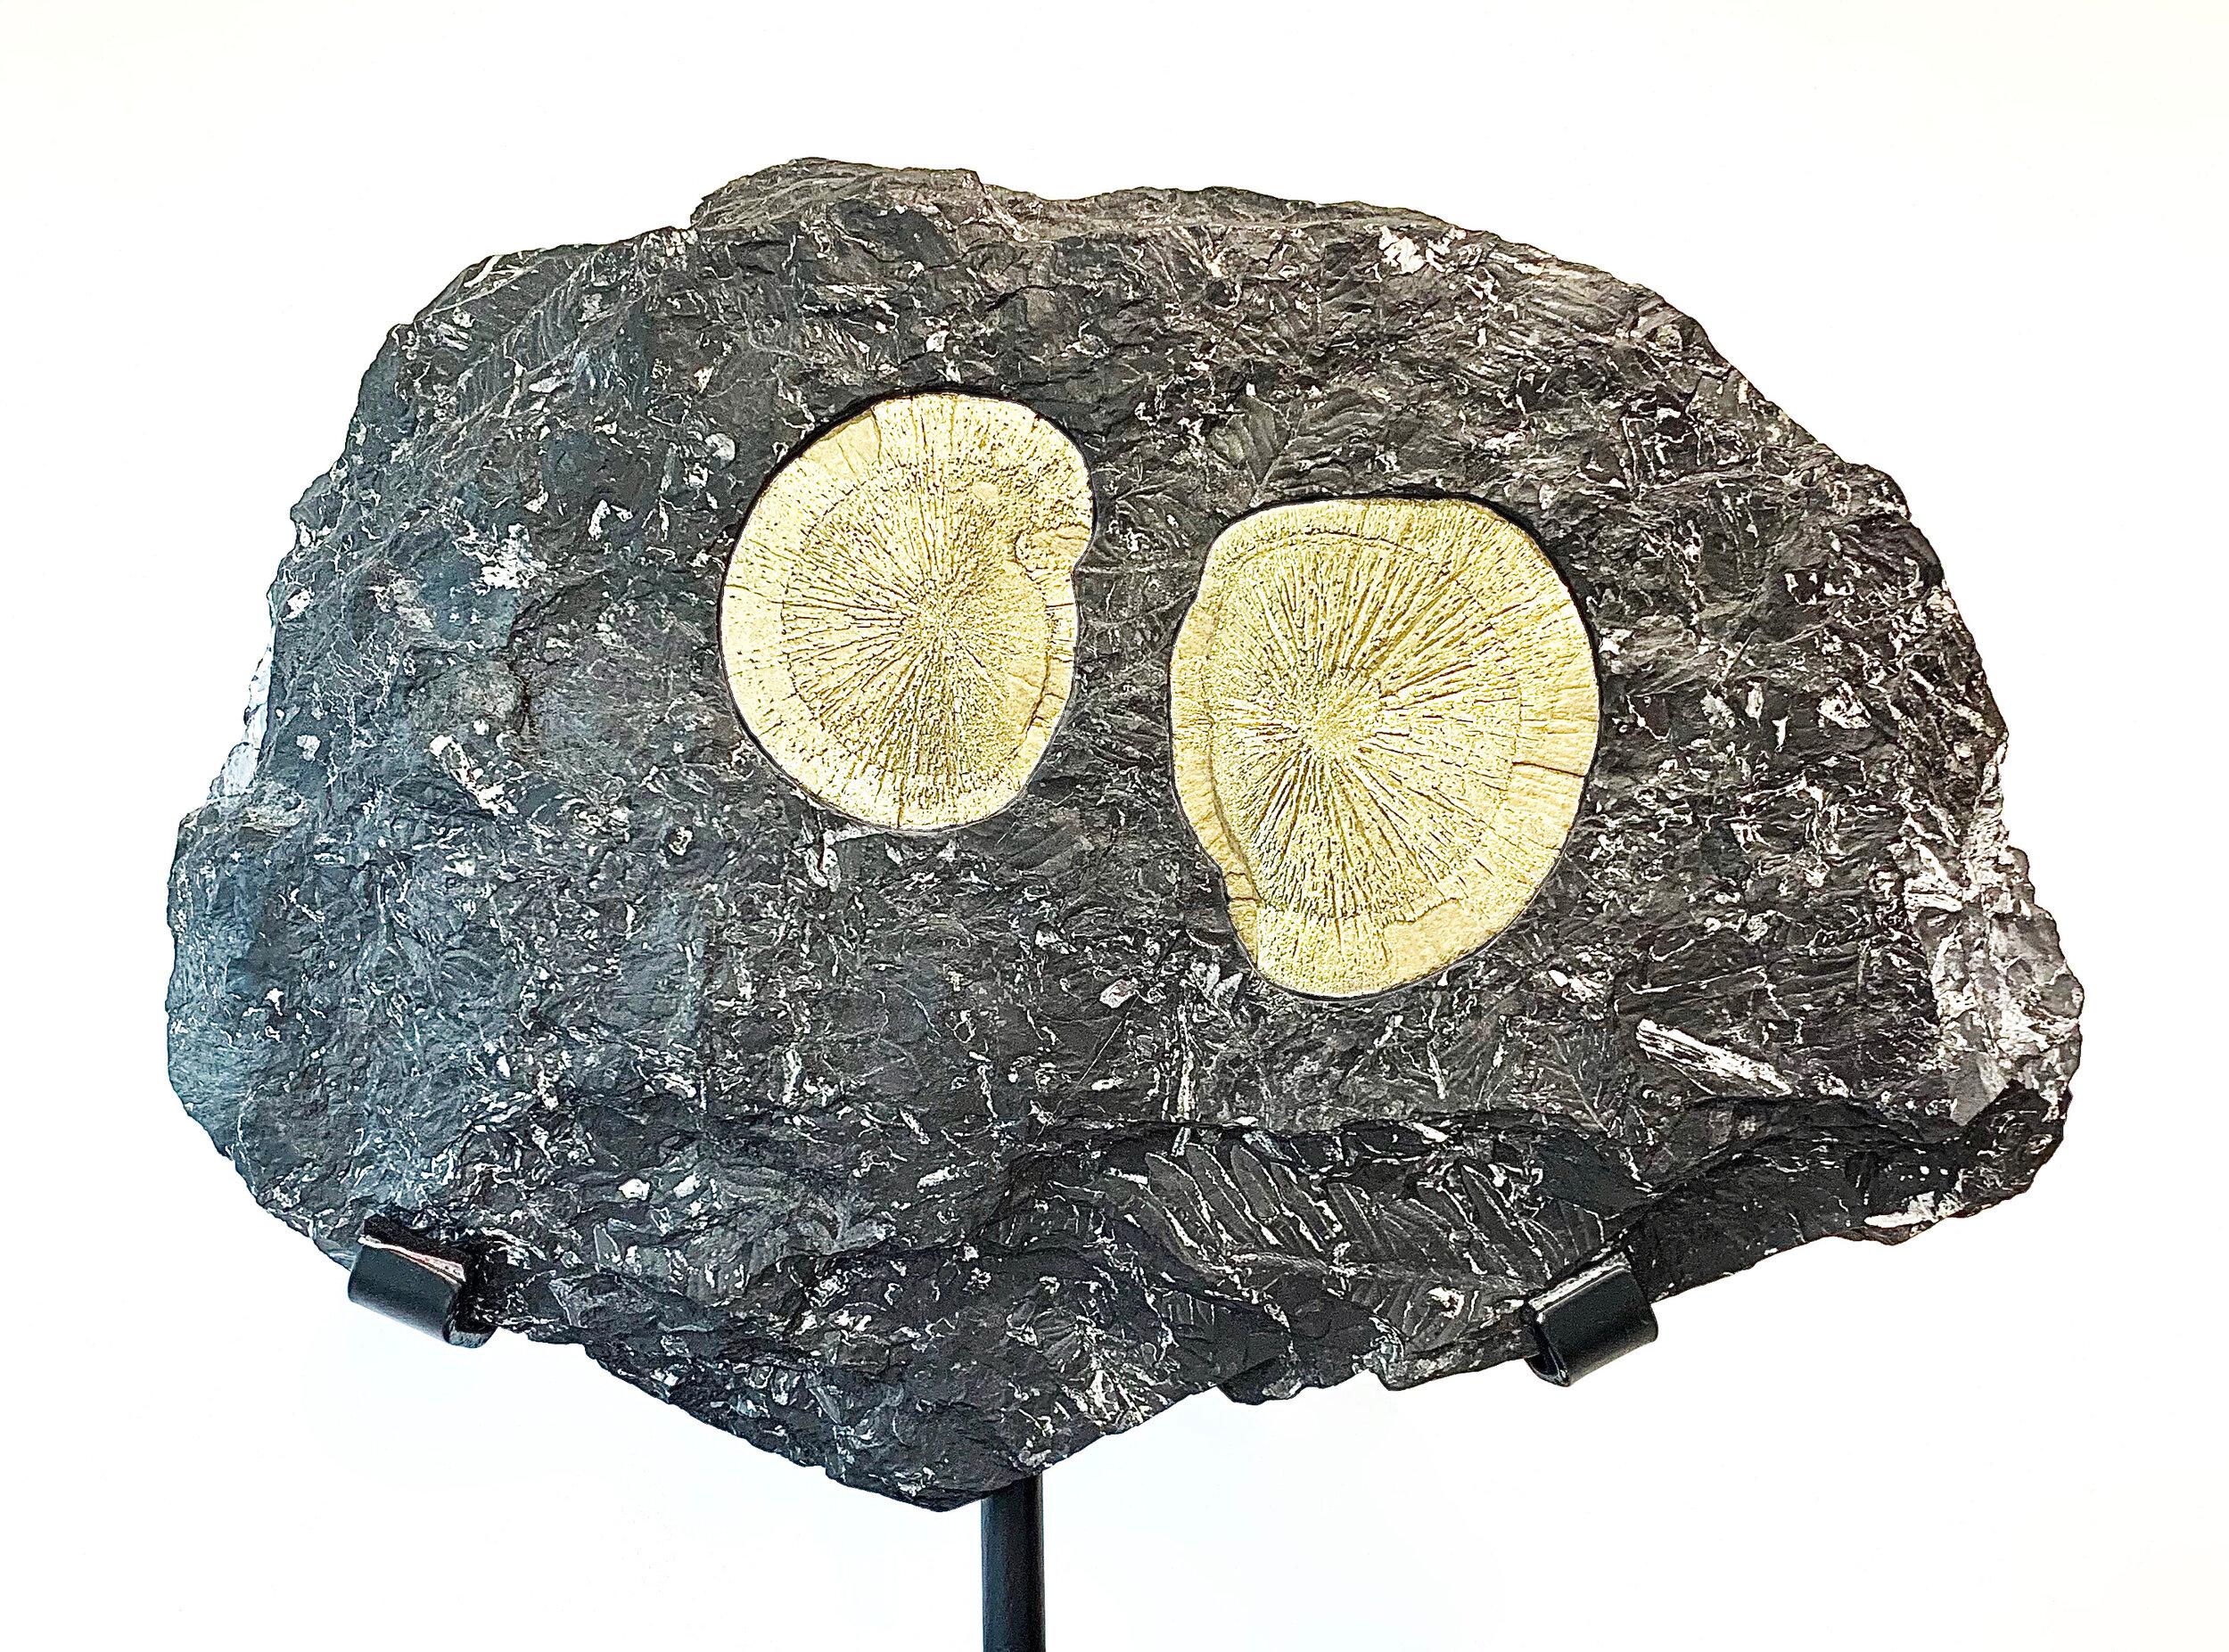 Pair of pyrite (Fools Gold) suns in a matrix slab, Illinois. Circa 30 Million Years Old

Measures: 24 x 34 x 2 cm

From rare dinosaur skulls and Stone Age tools to the world’s earliest animals that date back millions of years, the Extraordinary